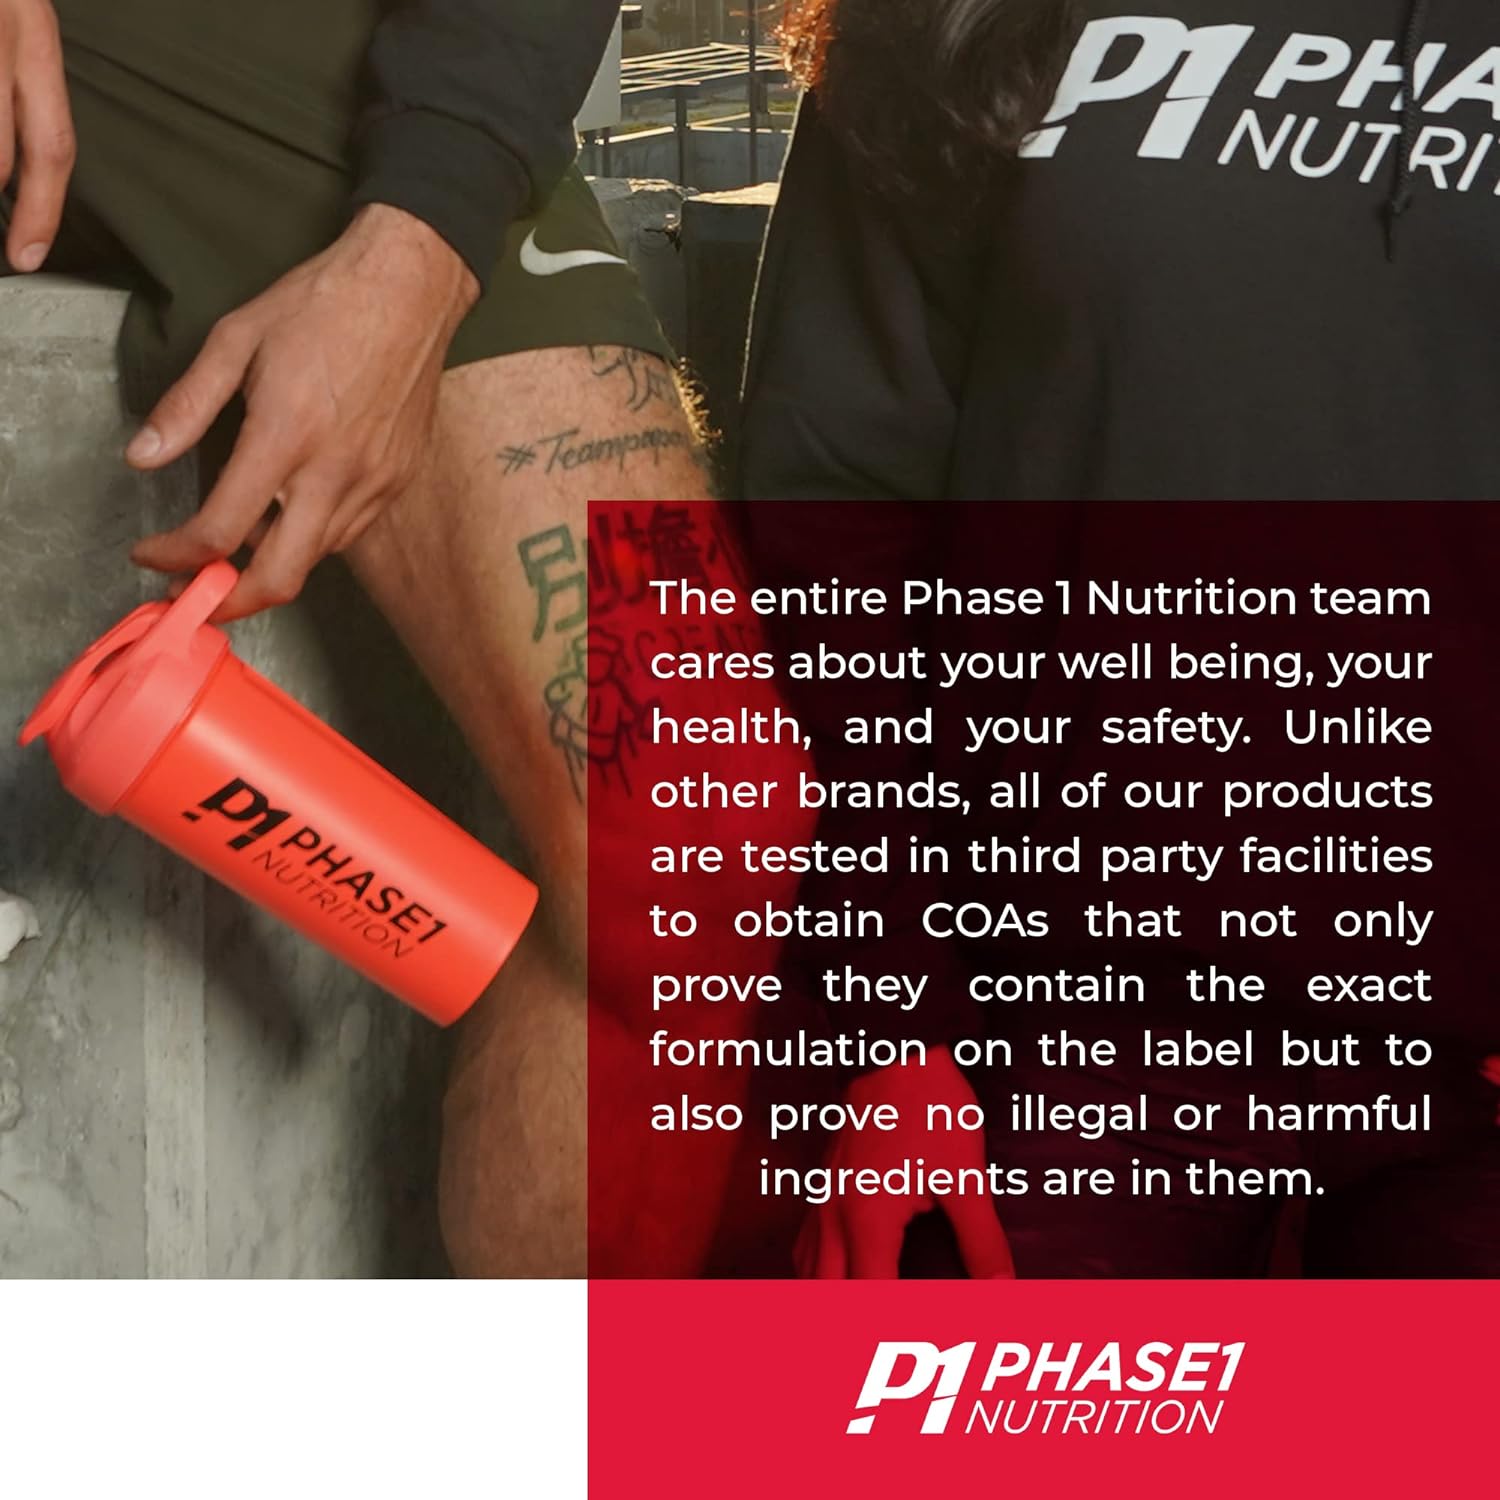 Pre Phase Daily Driver Preworkout - Phase 1 Nutrition (Sour Gummies, 2